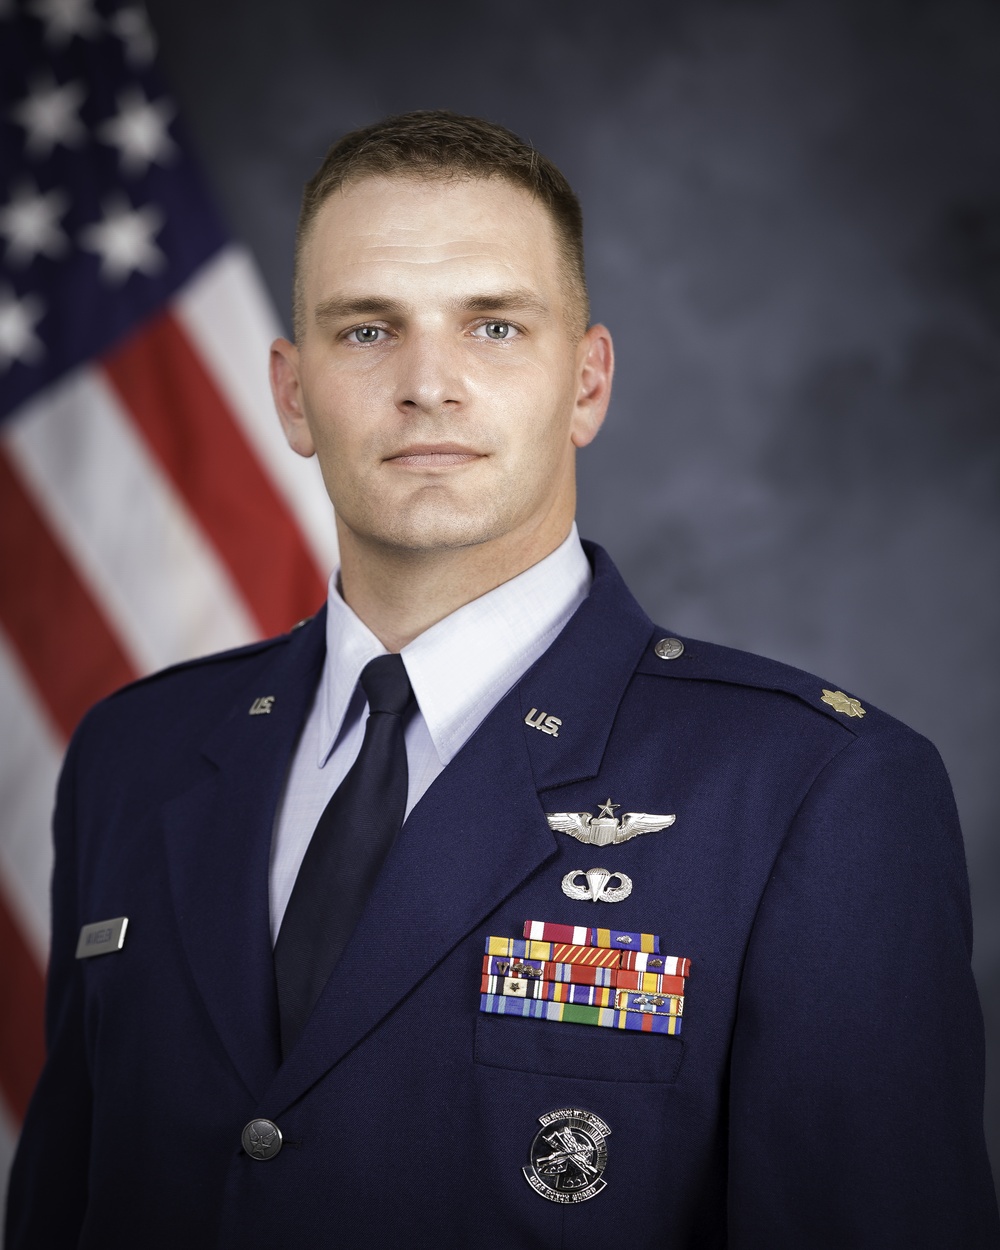 Official portrait, operations officer, the US Air Force Honor Guard, Maj. Ryan M. VanVeelen, US Air Force